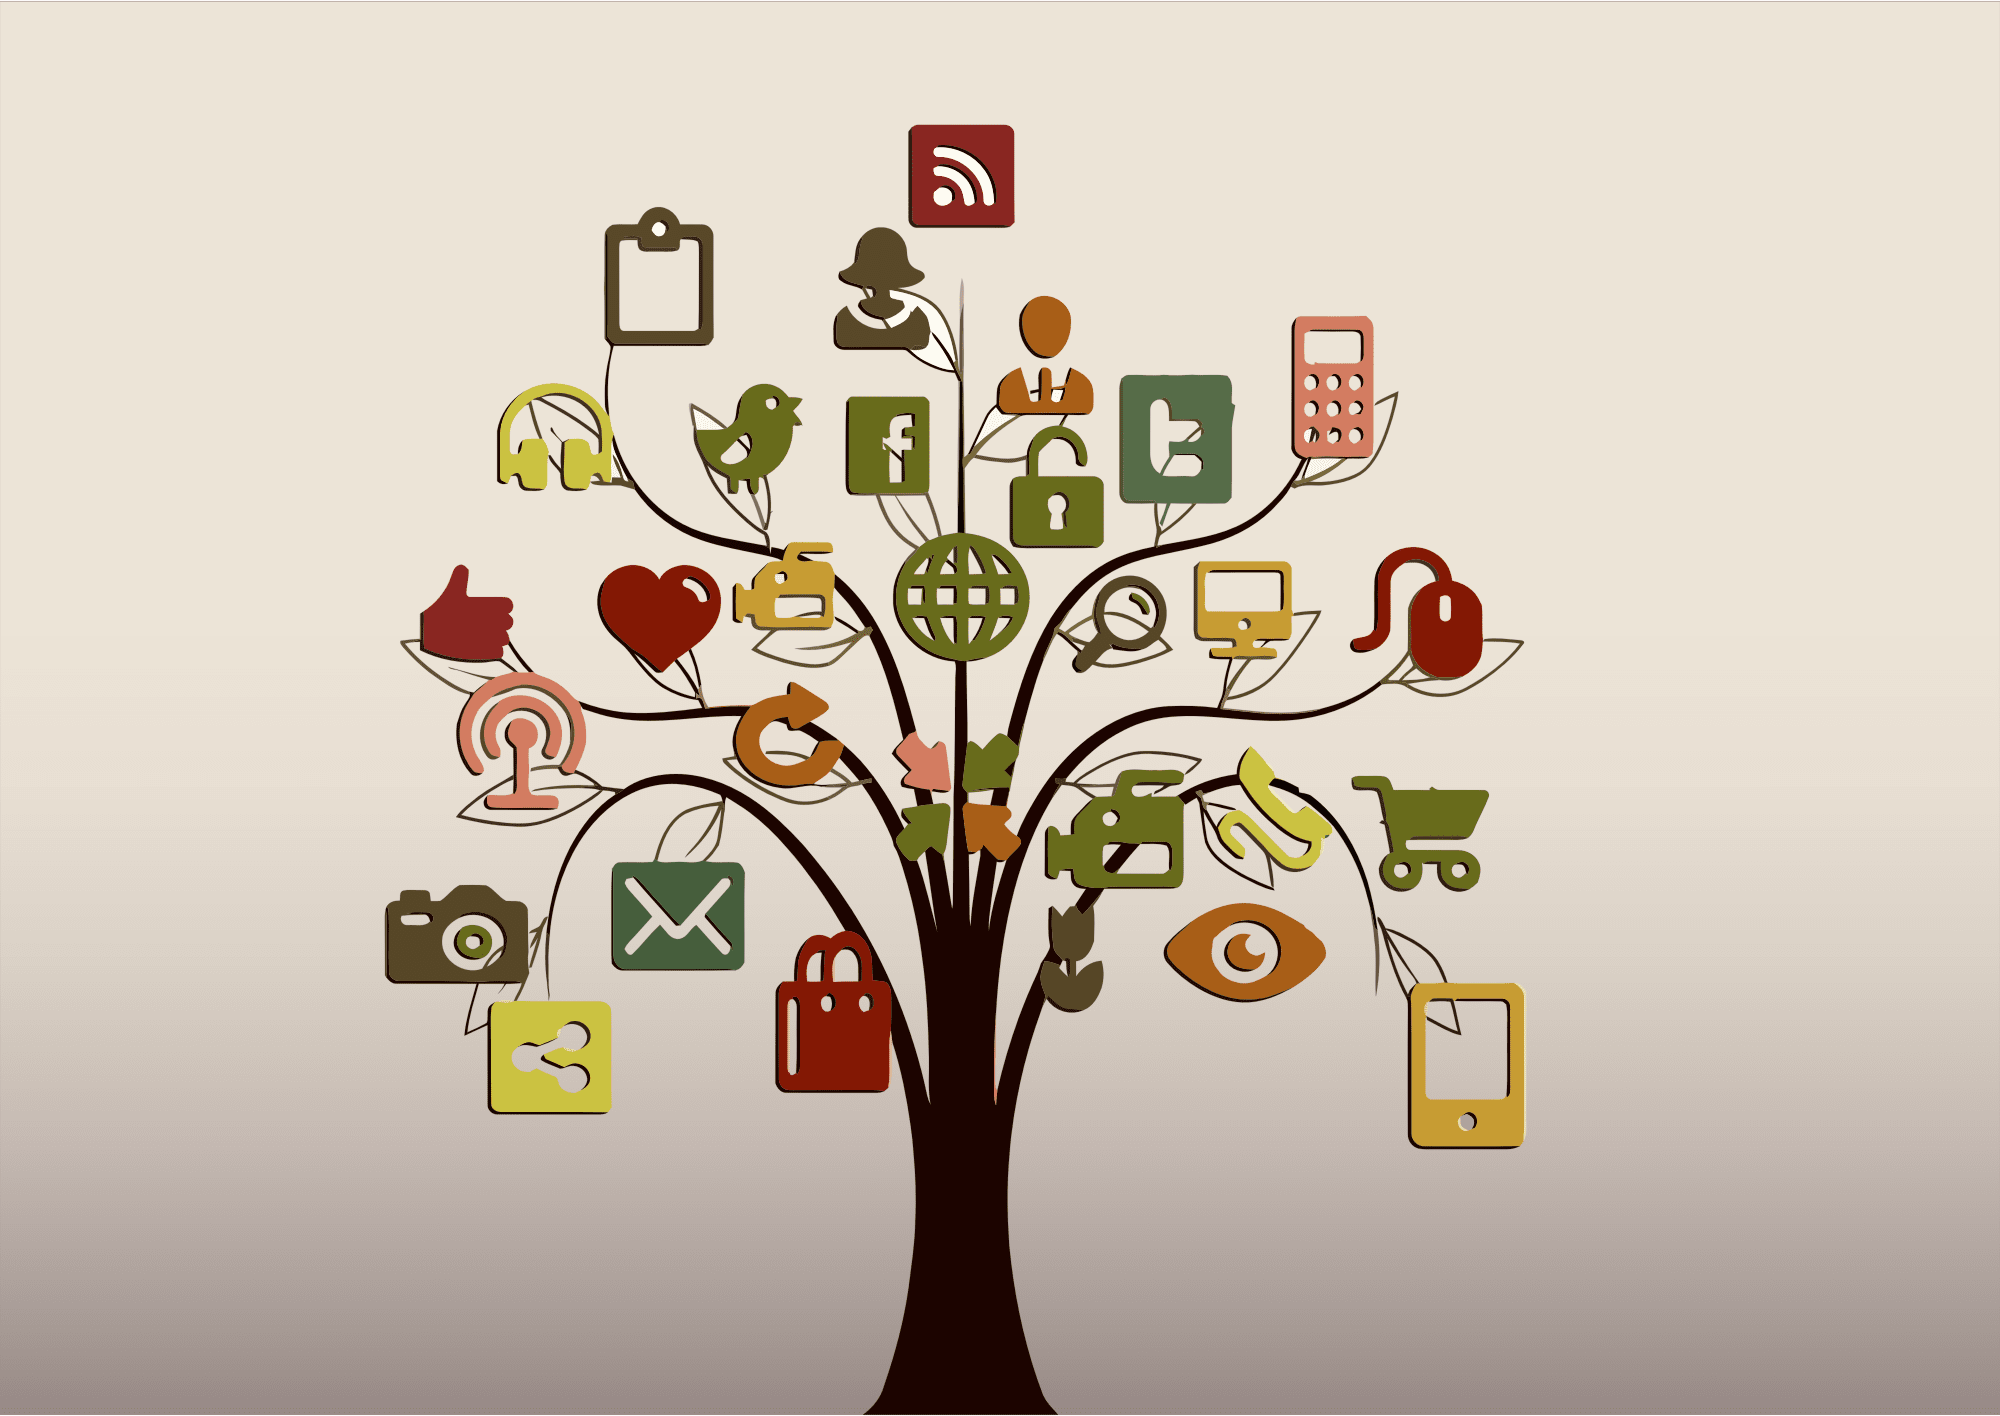 Social Media Tree by GDJ from OpenClipArt - https://openclipart.org/artist/GDJ